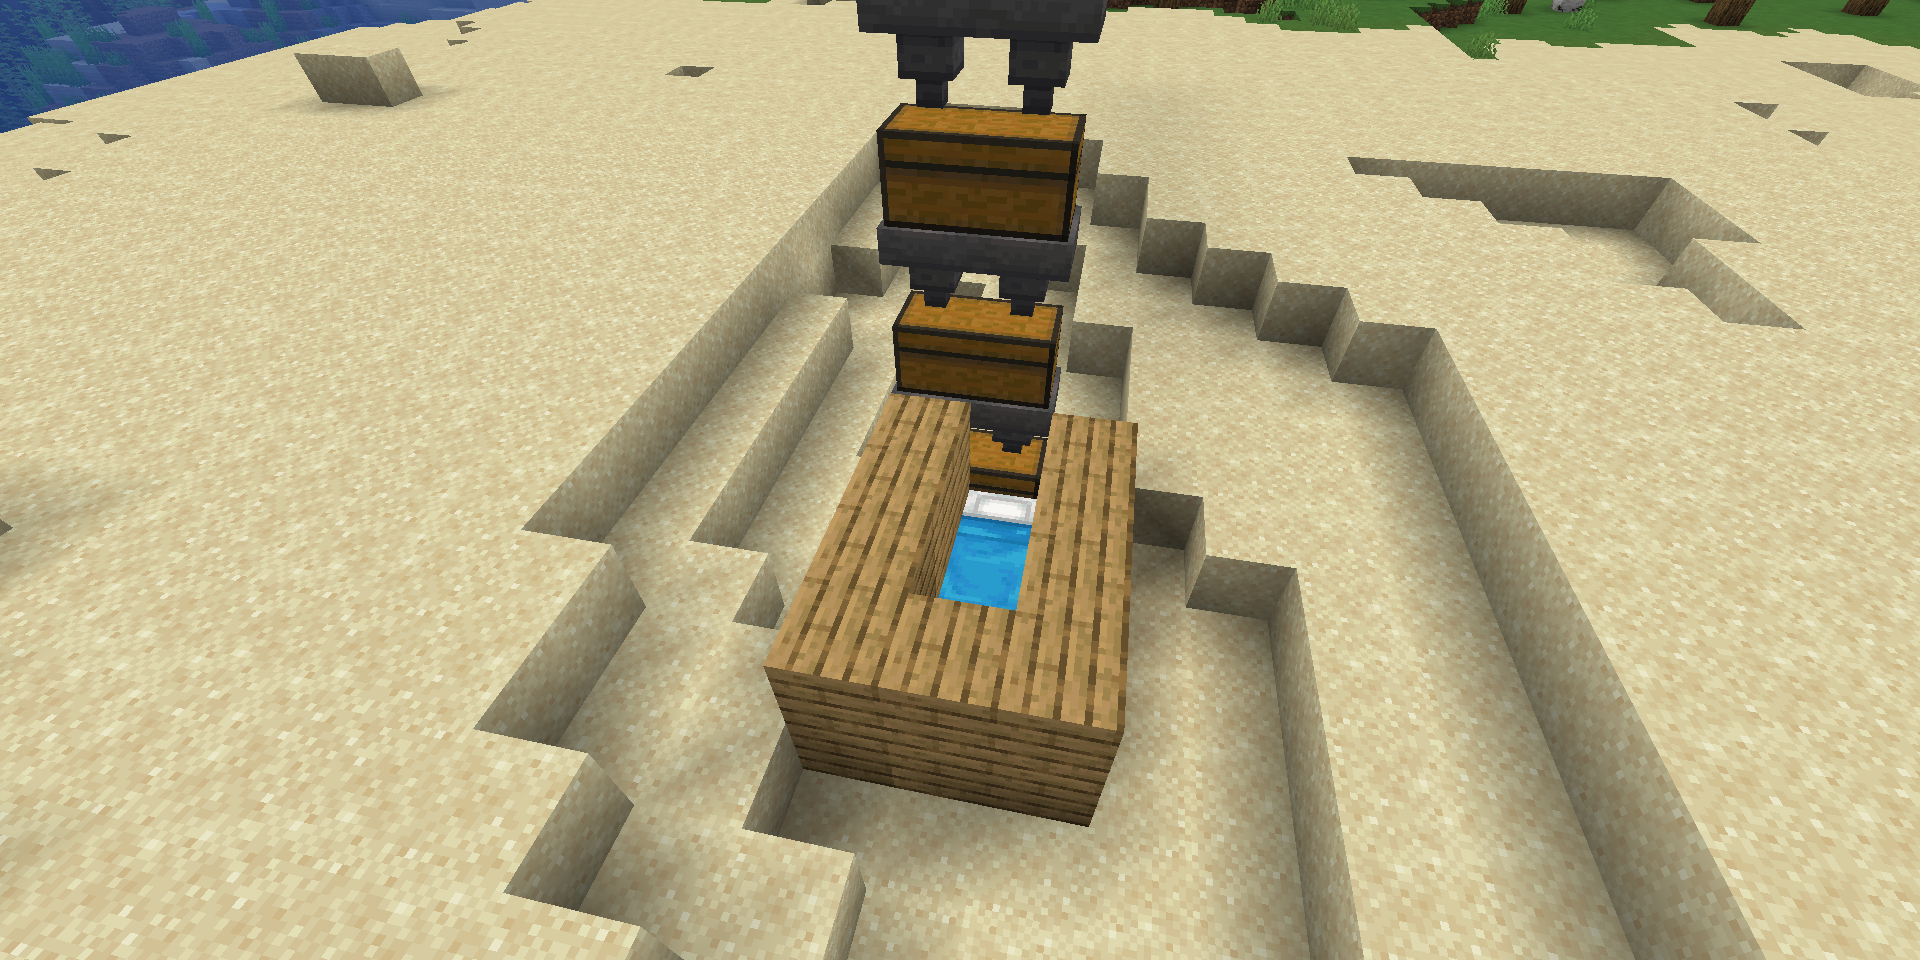 A Minecraft bed with some wood around it in front of stacked chests and hoppers